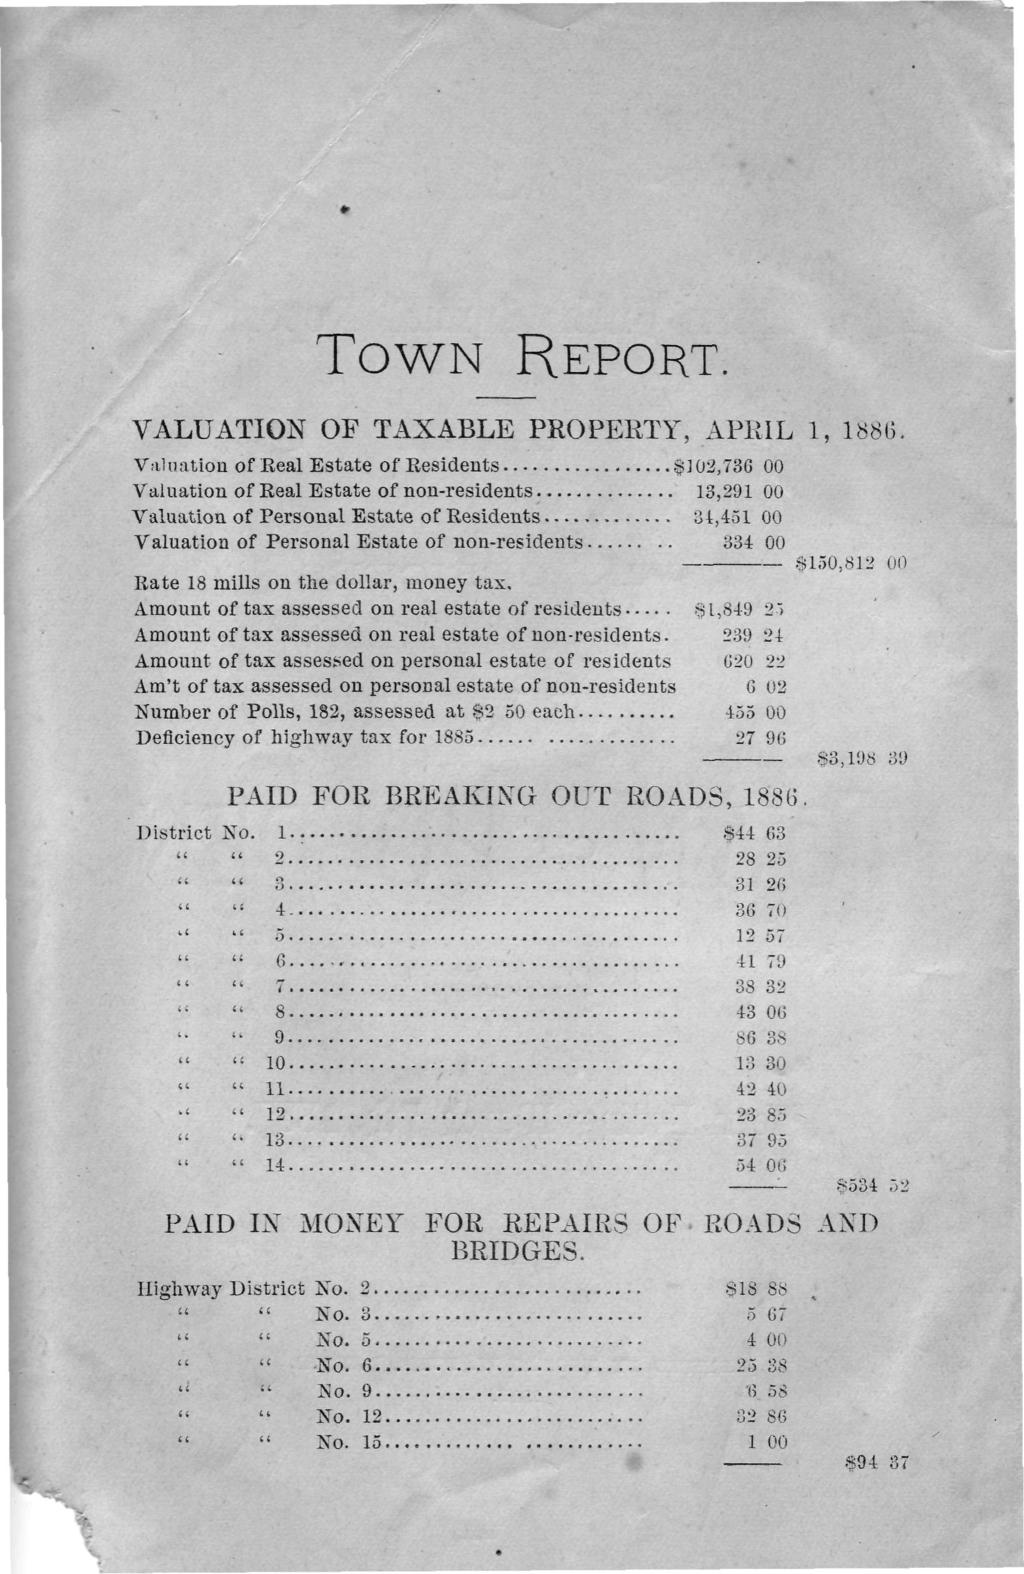 TOWN REPORT. VALUATION OF TAXABLE PROPERTY, APRIL 1, 1886.